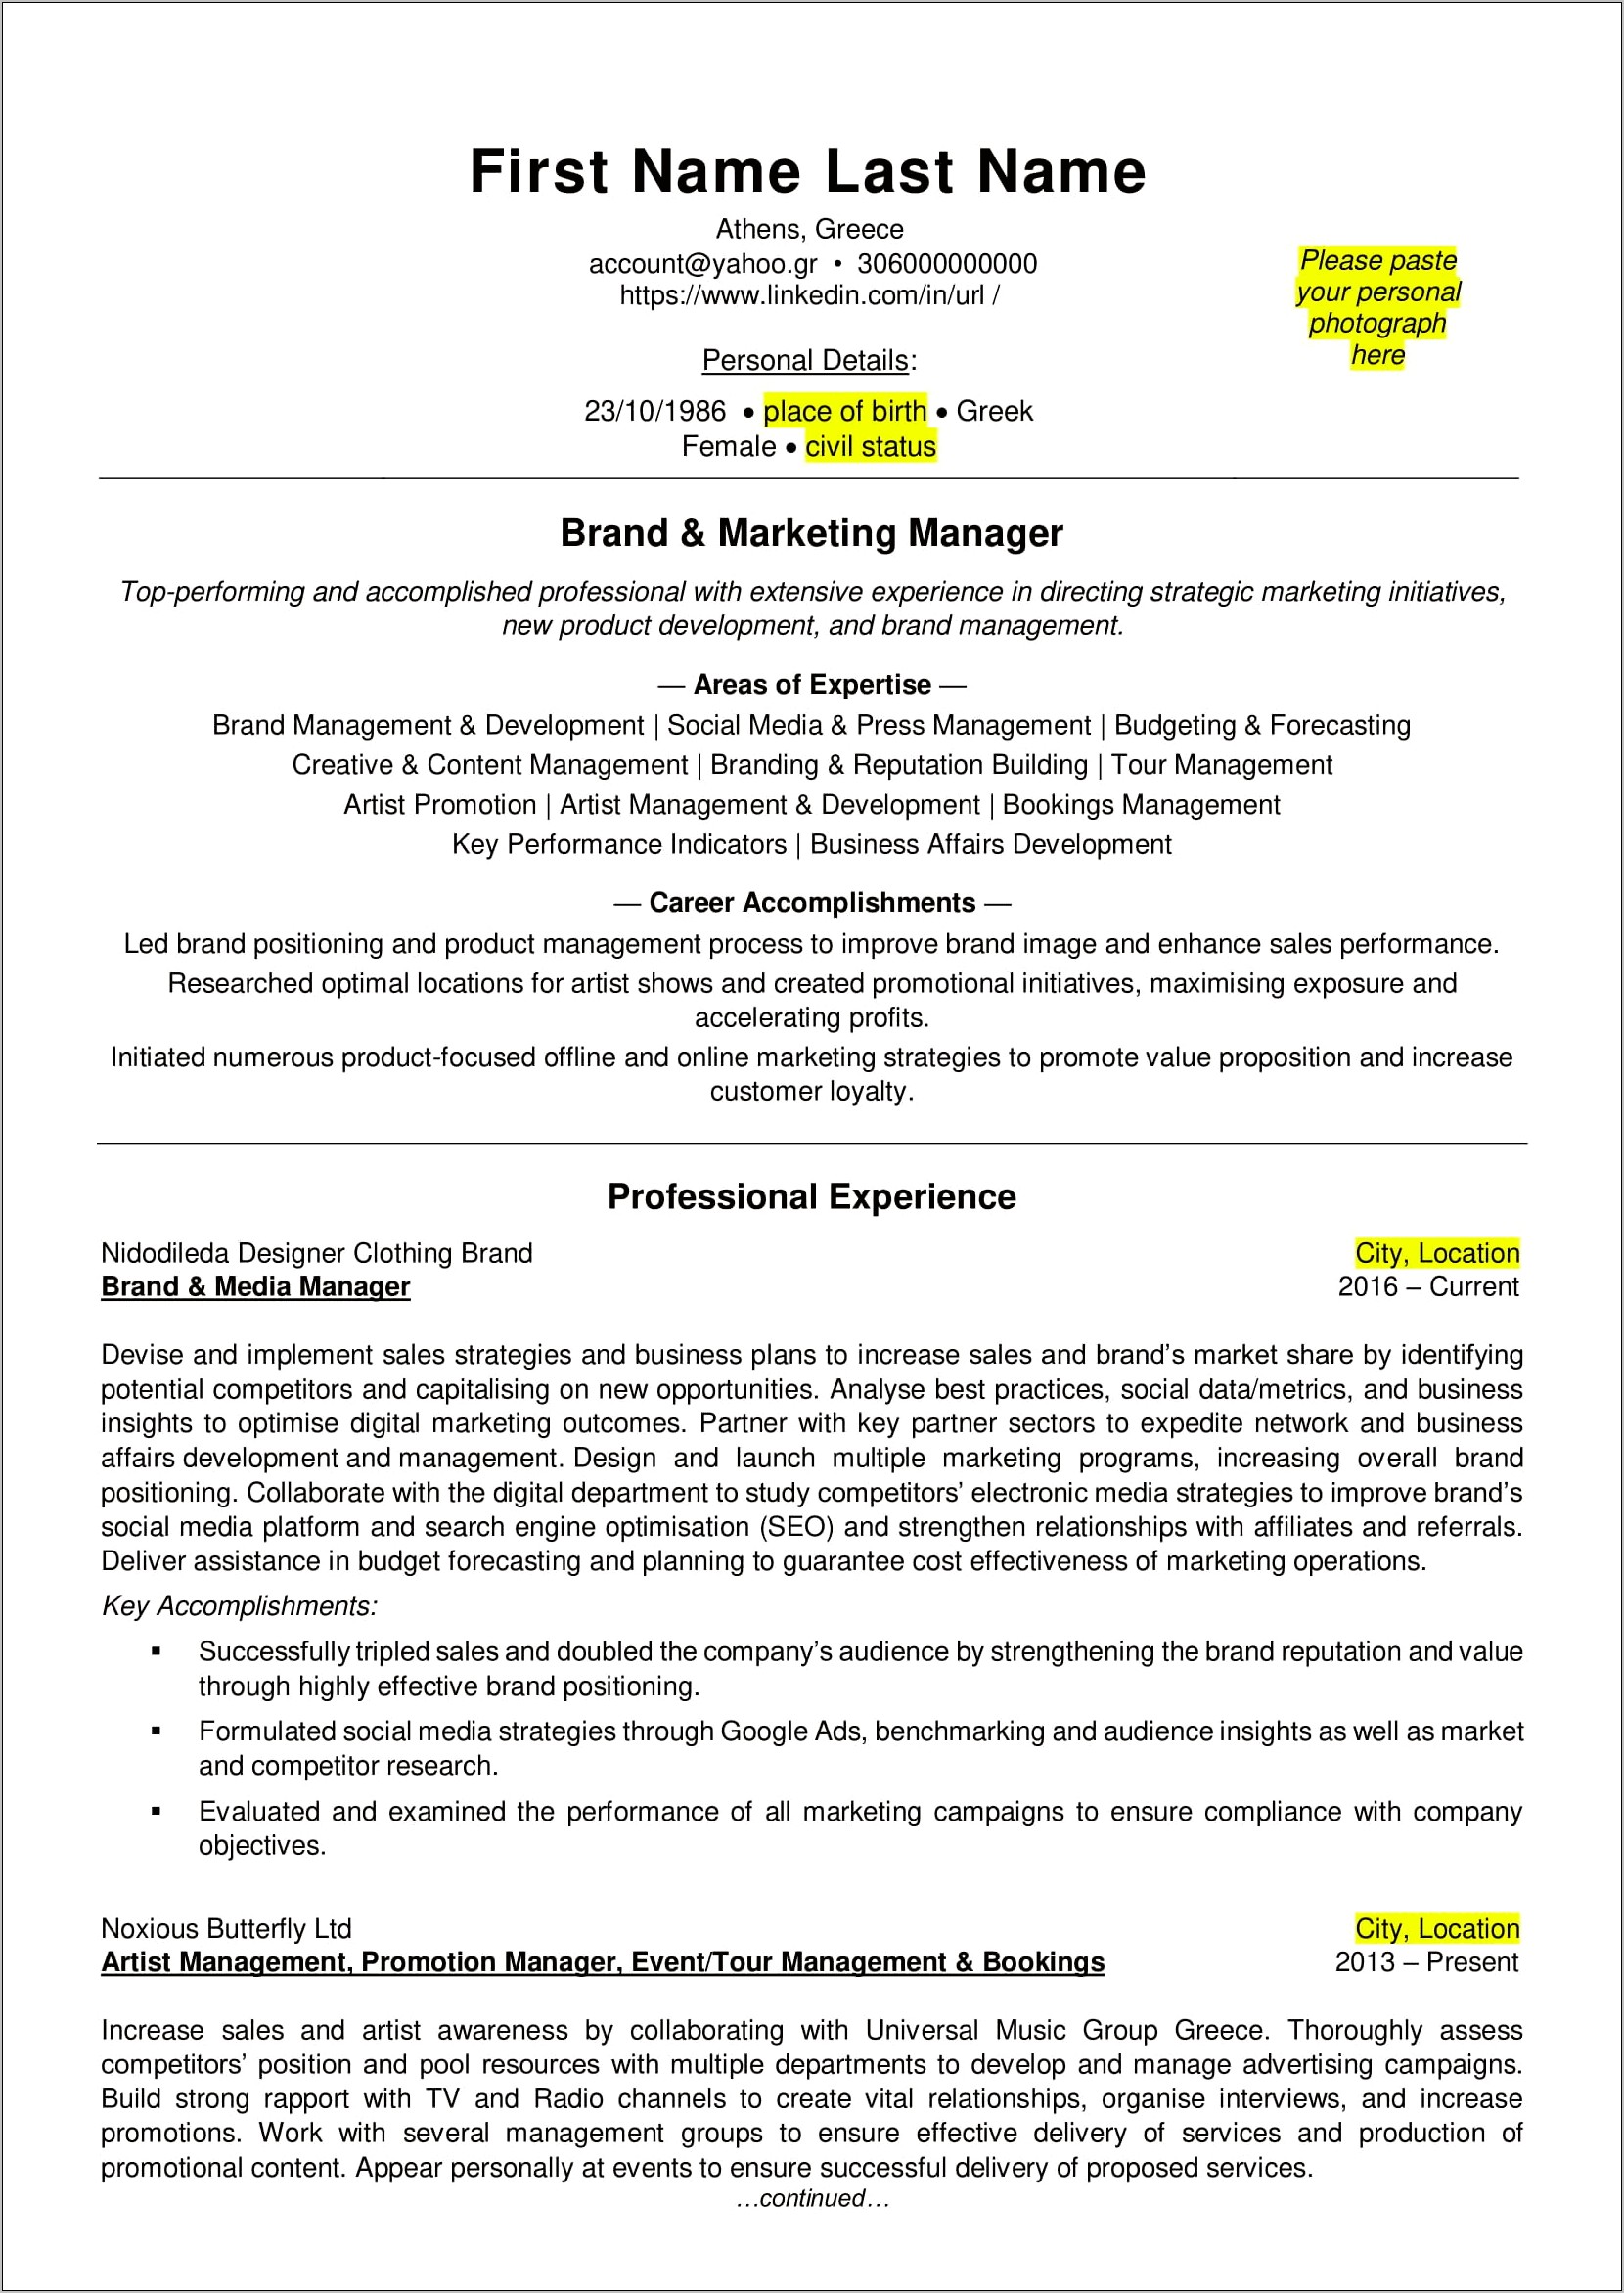 Assessing Past Work Experience For Writing Resume